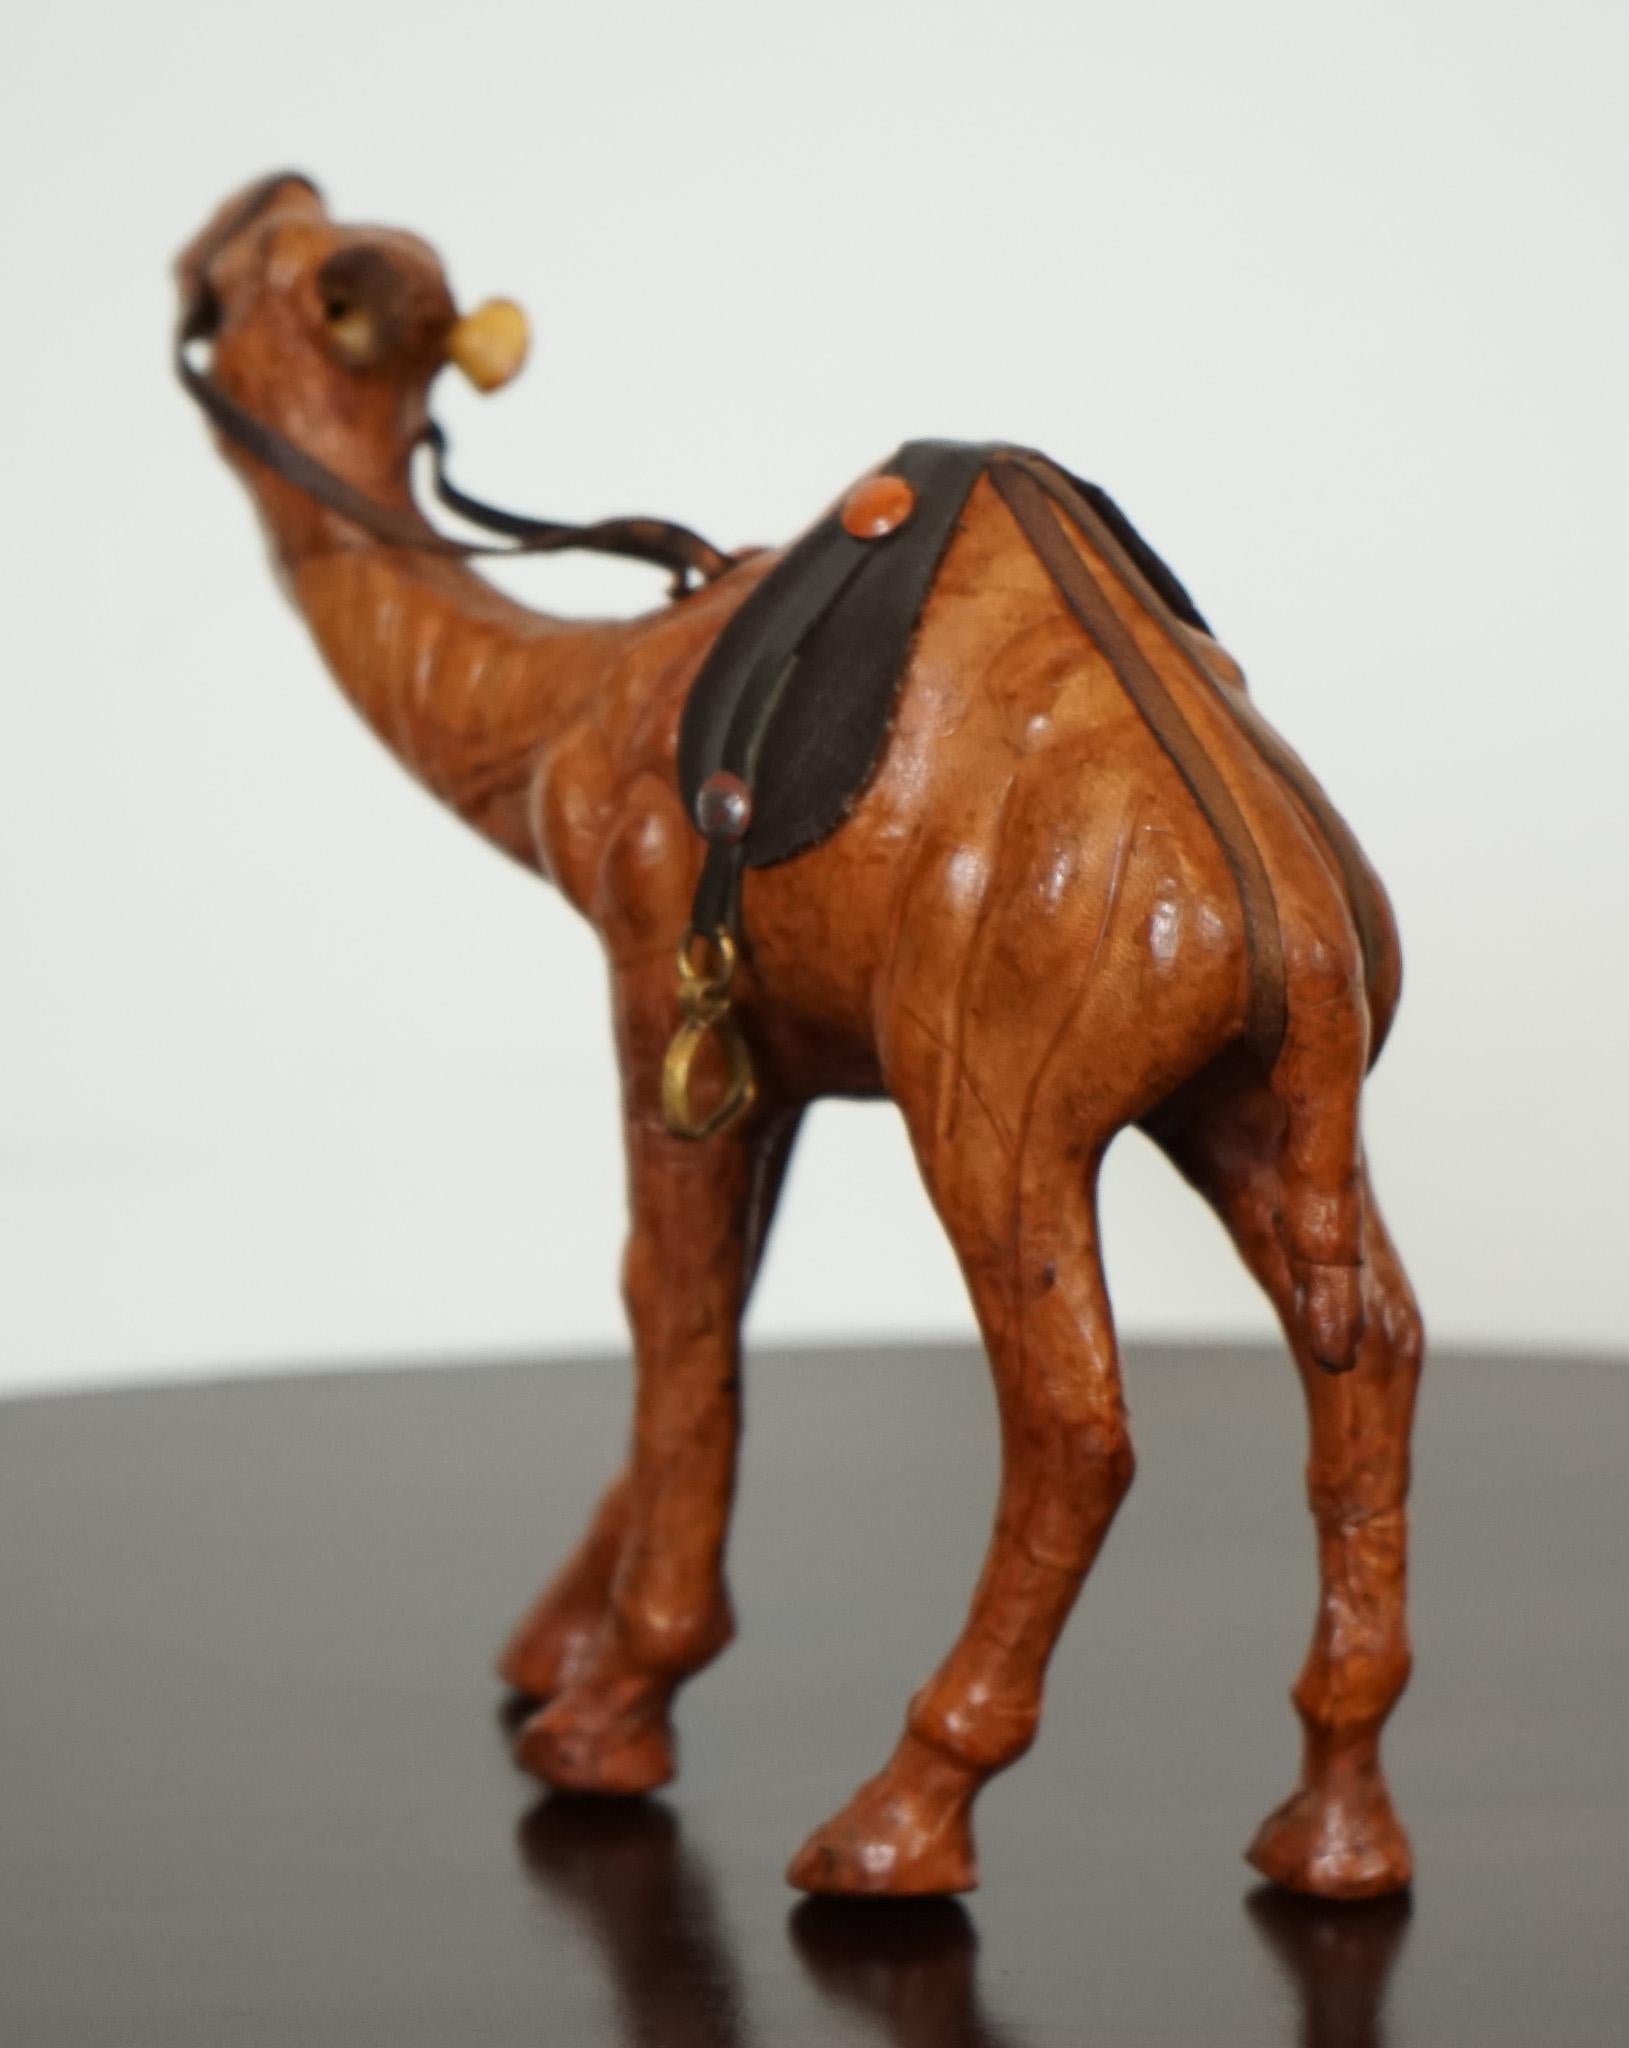 LIBERTY'S LONDON CAMEL SculPTURE WiTH LOVELY AGED LEATHER ON HAND CARved WOOD  (Britisch) im Angebot